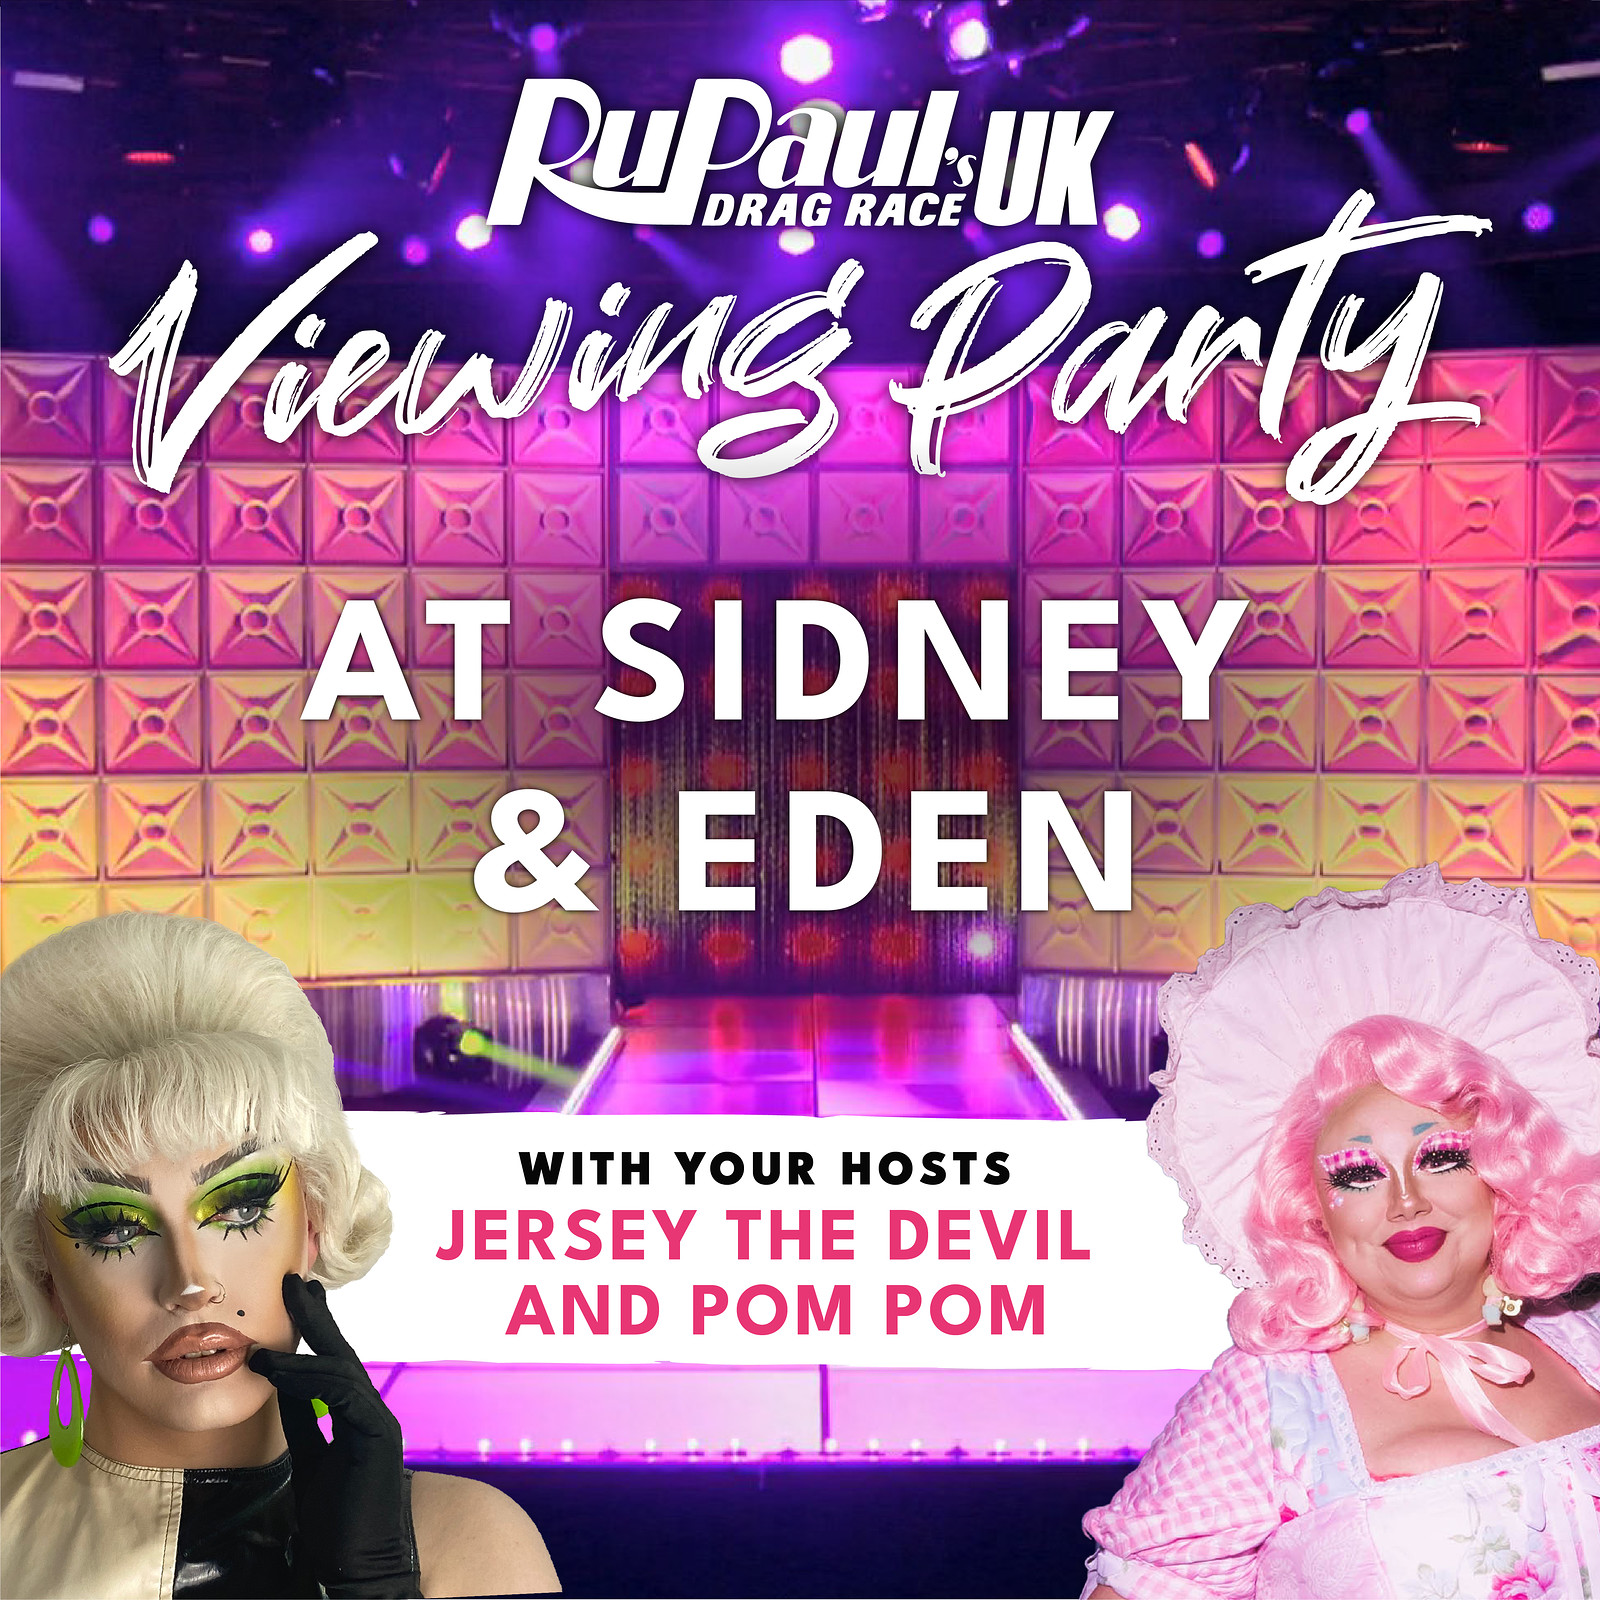 RuPaul's Drag Race UK Episode 7 Viewing Party at Sidney & Eden